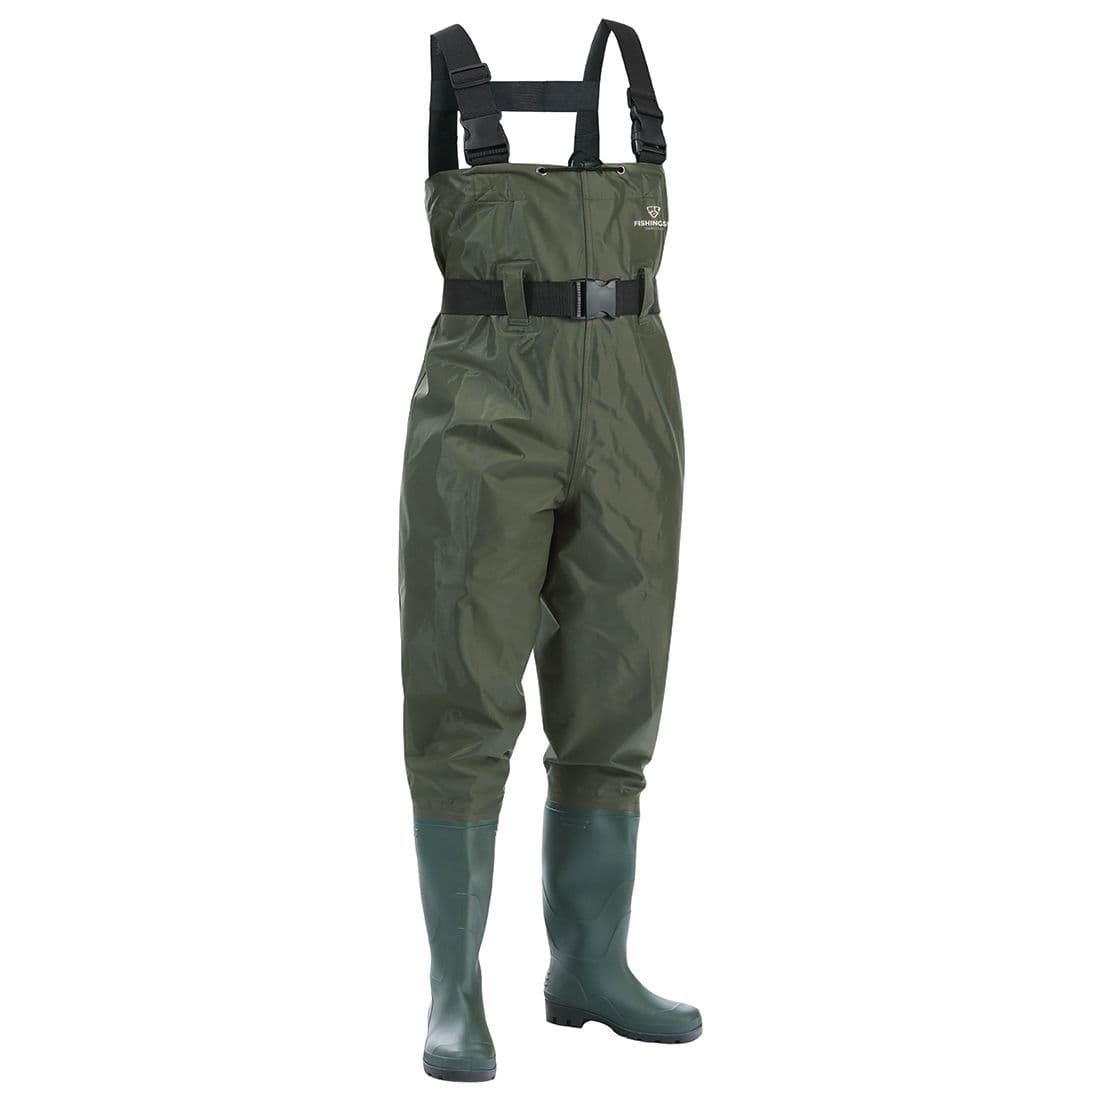 Camo Chest Fishing Hunting Waders for Men Maintenance Workwear Rubber Boot  Foot